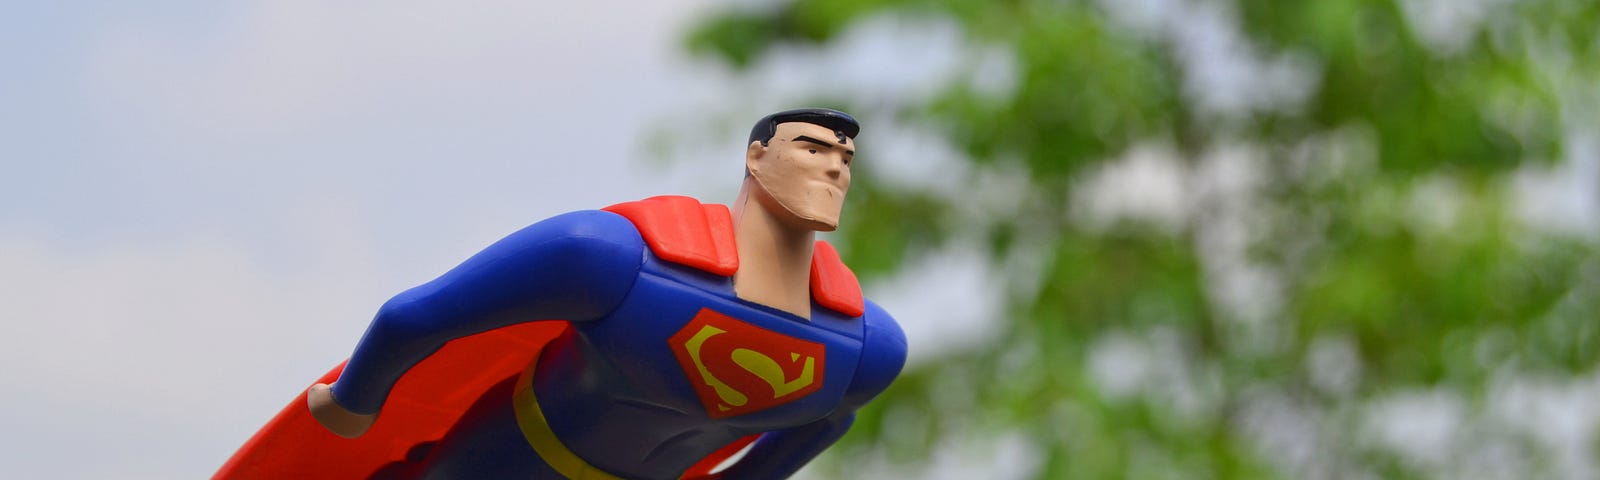 An action figure of Superman flies through the air in front of a green tree